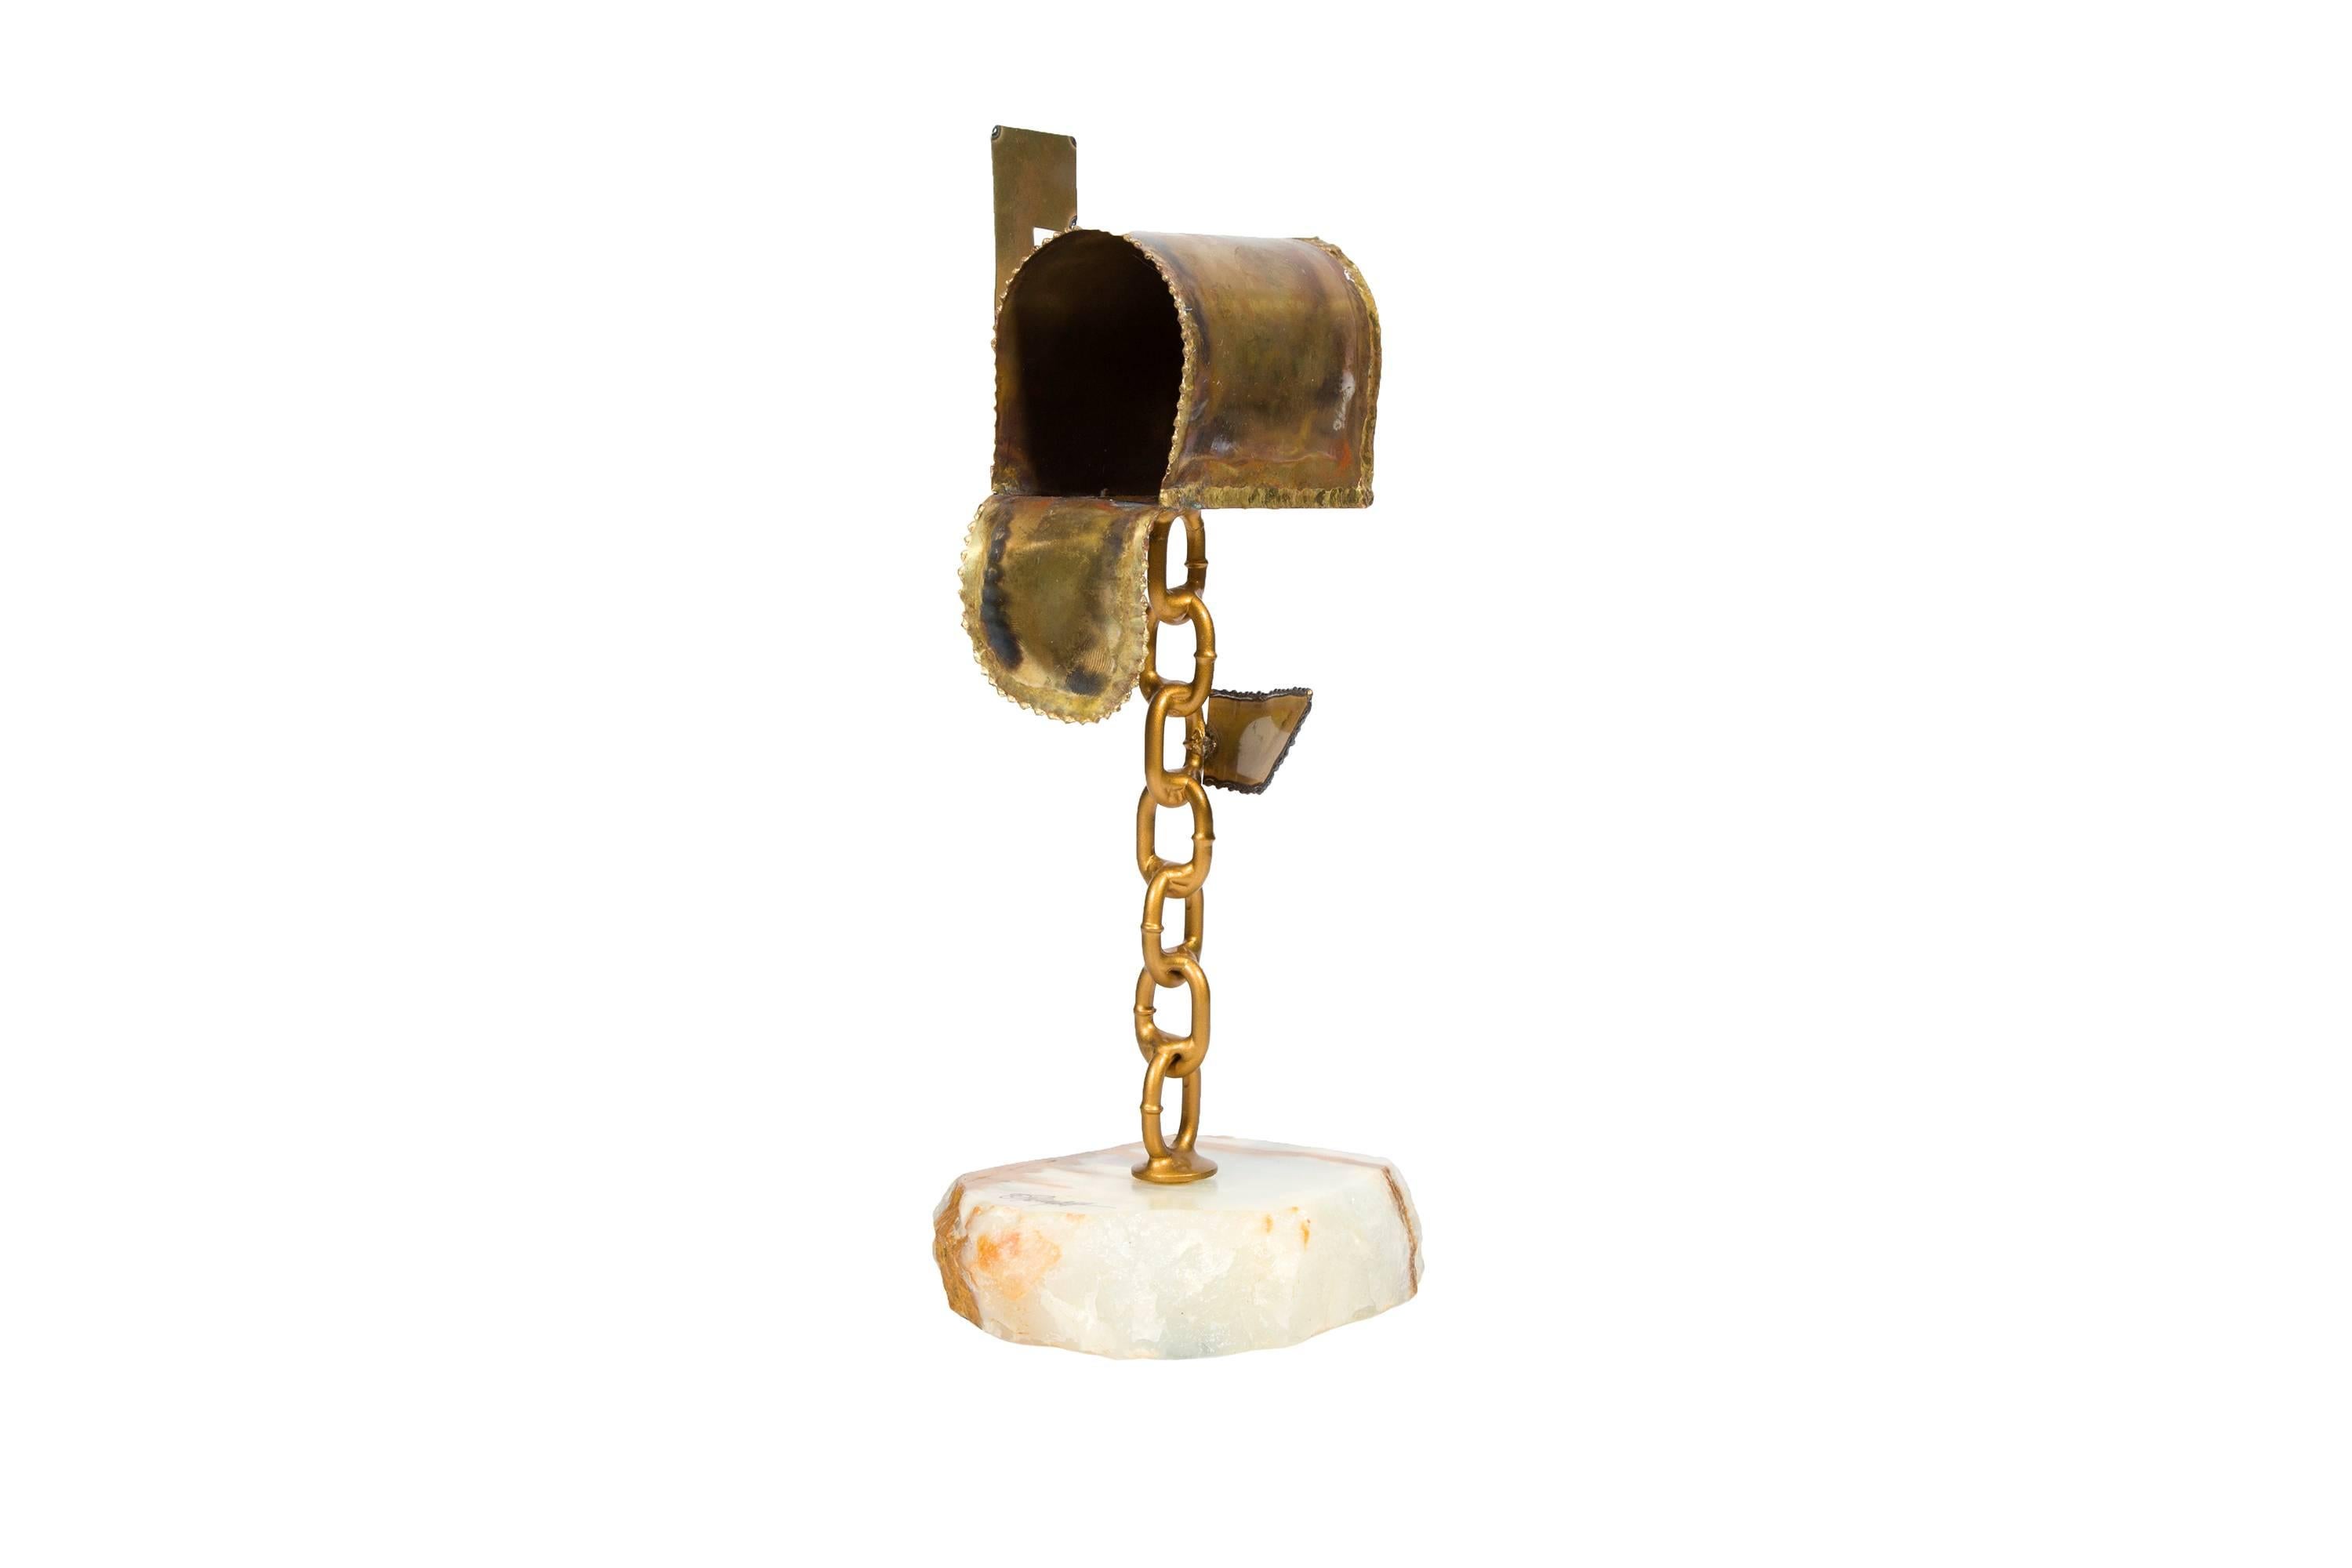 Mailbox sculpture, marble and brass - $500.